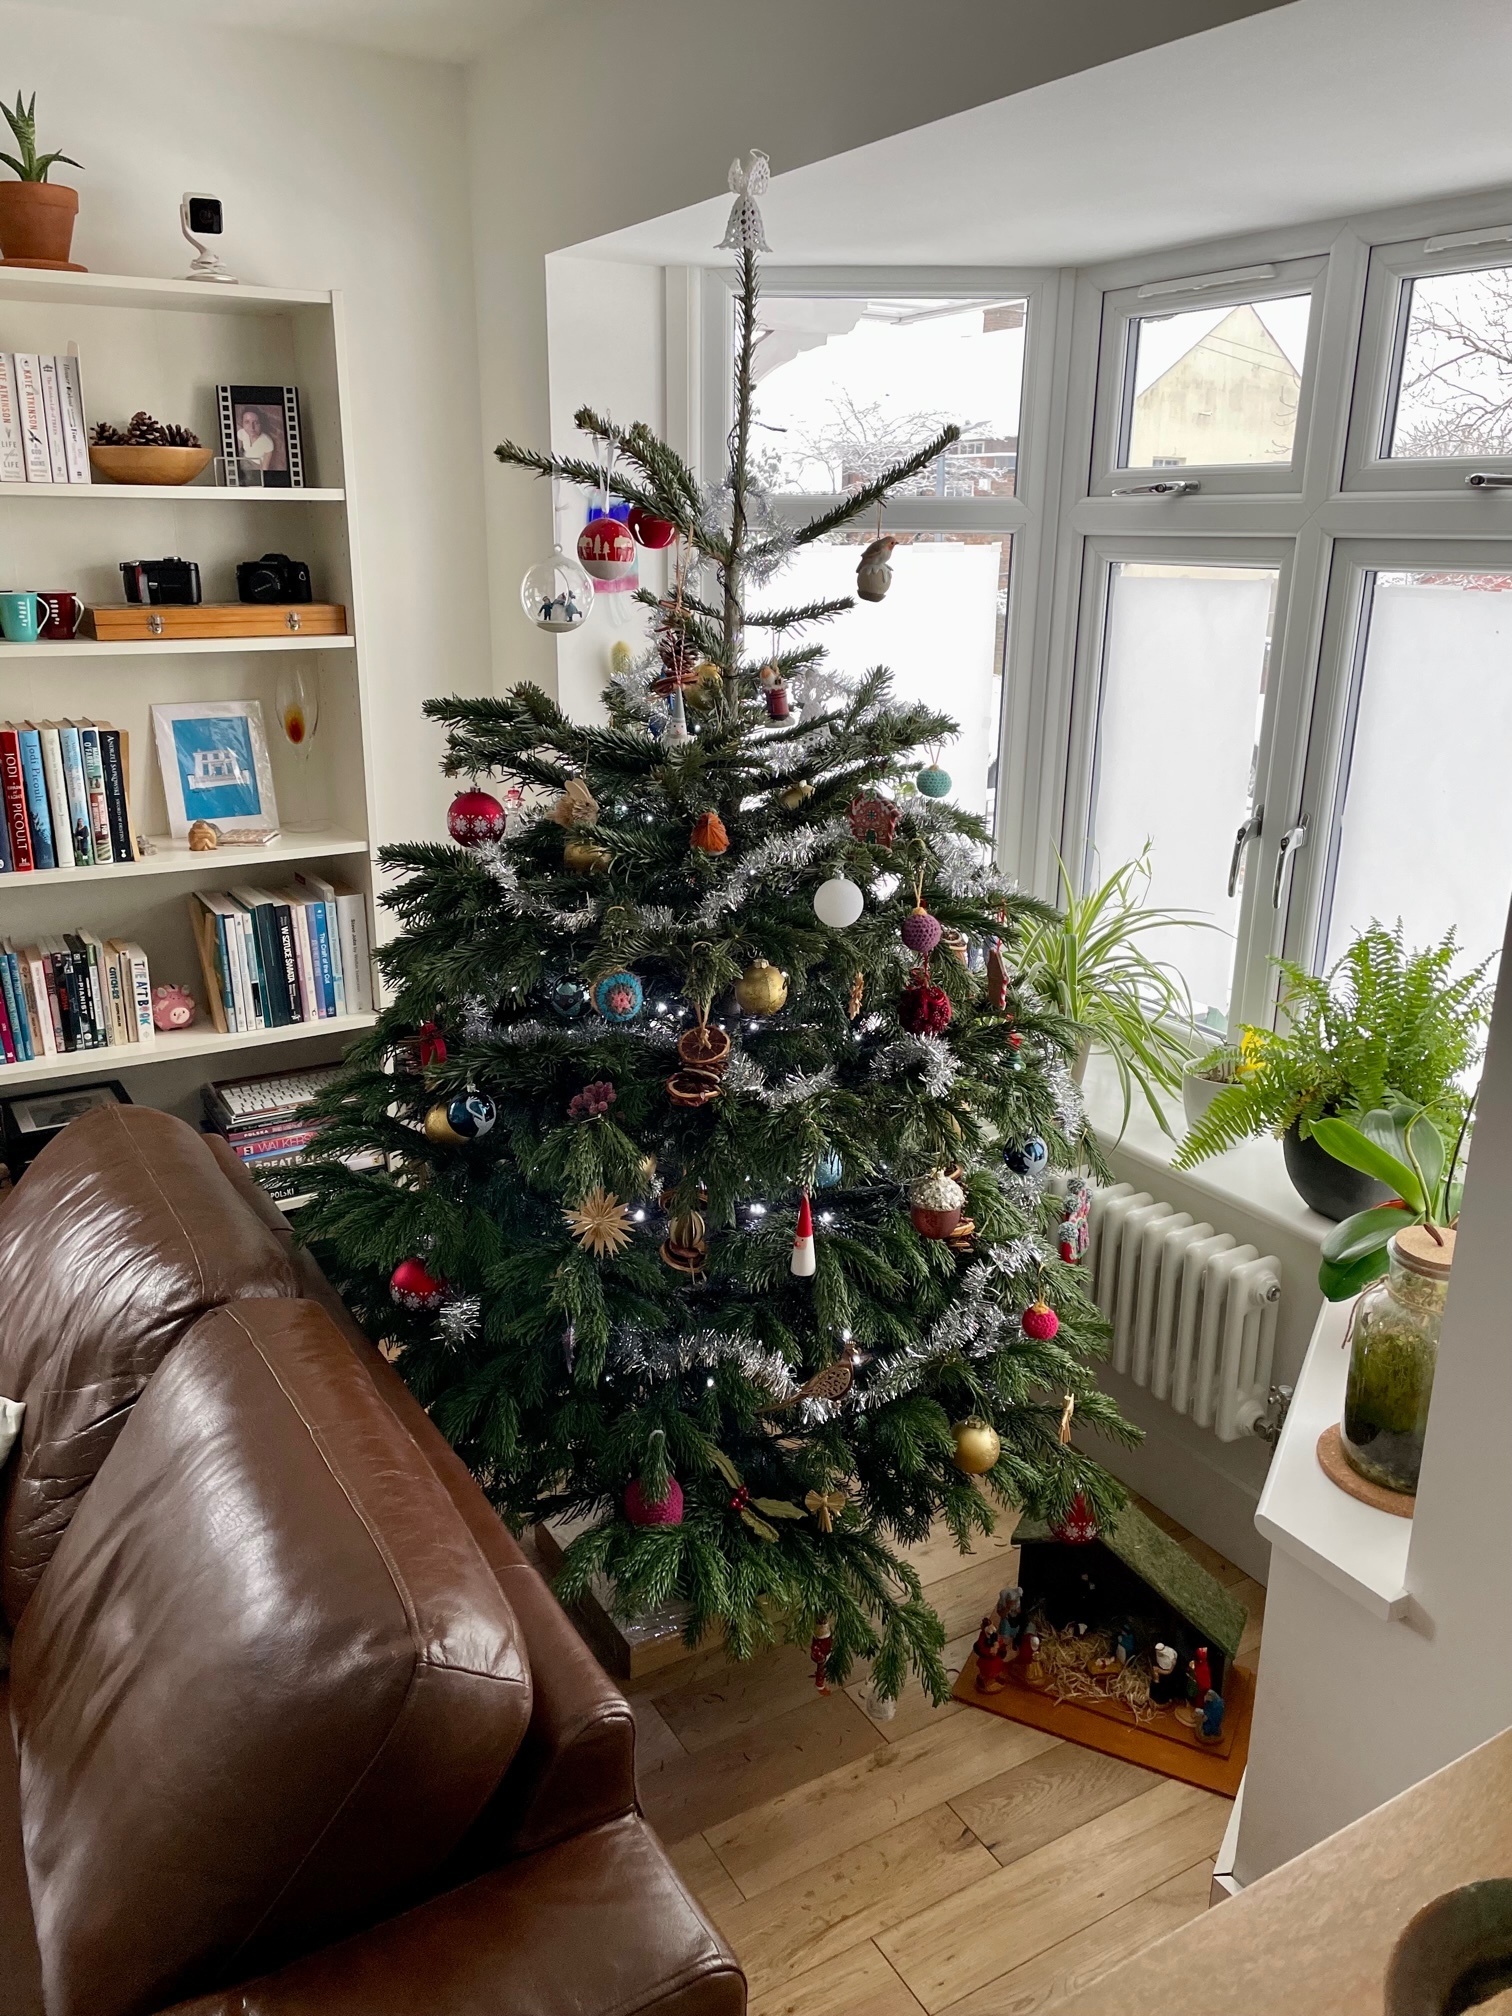 A basic photo of a Christmas tree in a living room